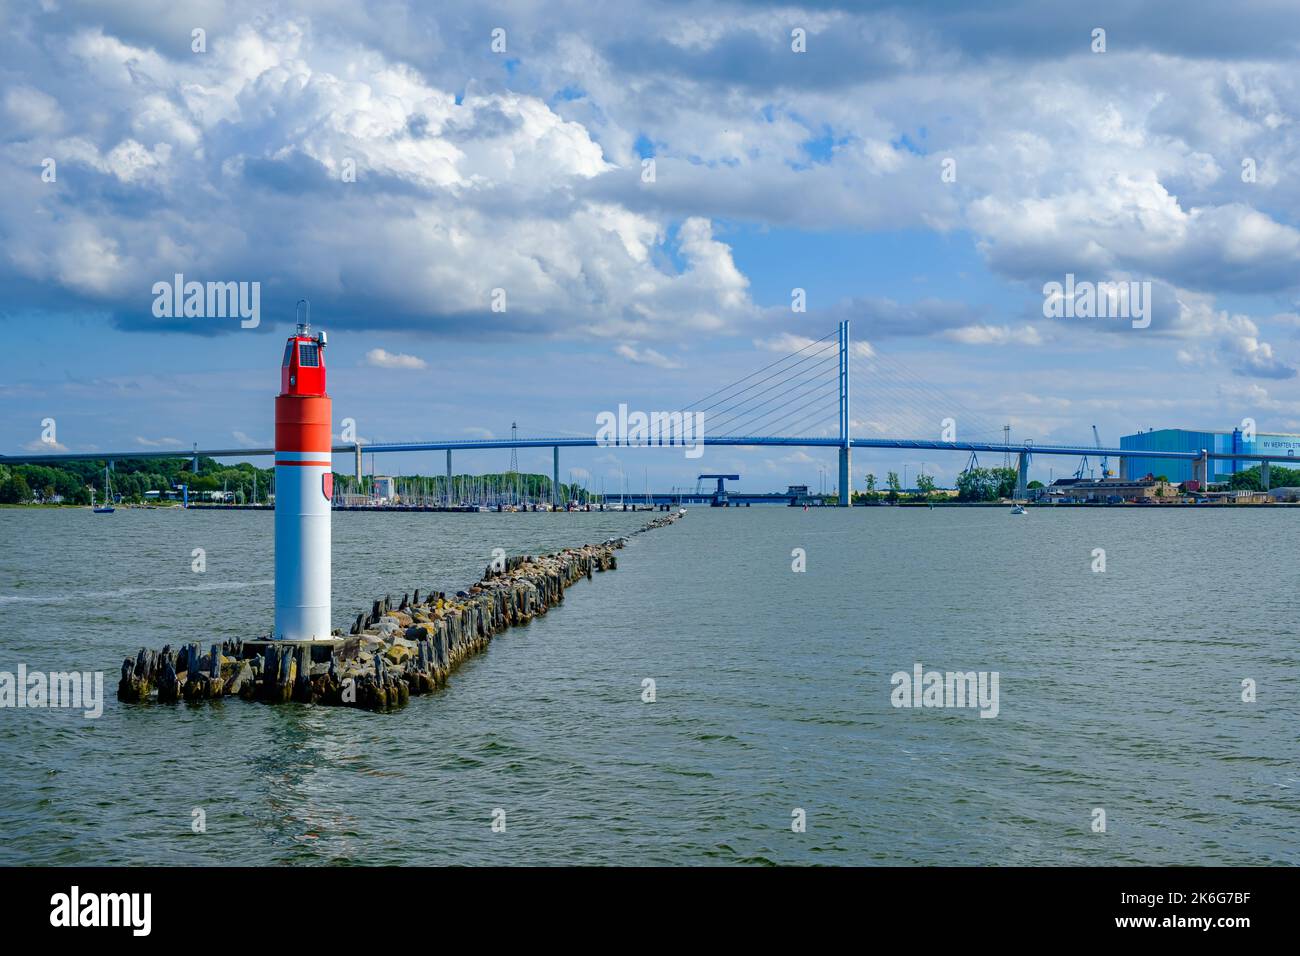 Picturesque view from the central breakwater light over the central breakwater along the Strela Sound to the New Rügen Bridge, Stralsund, Germany. Stock Photo